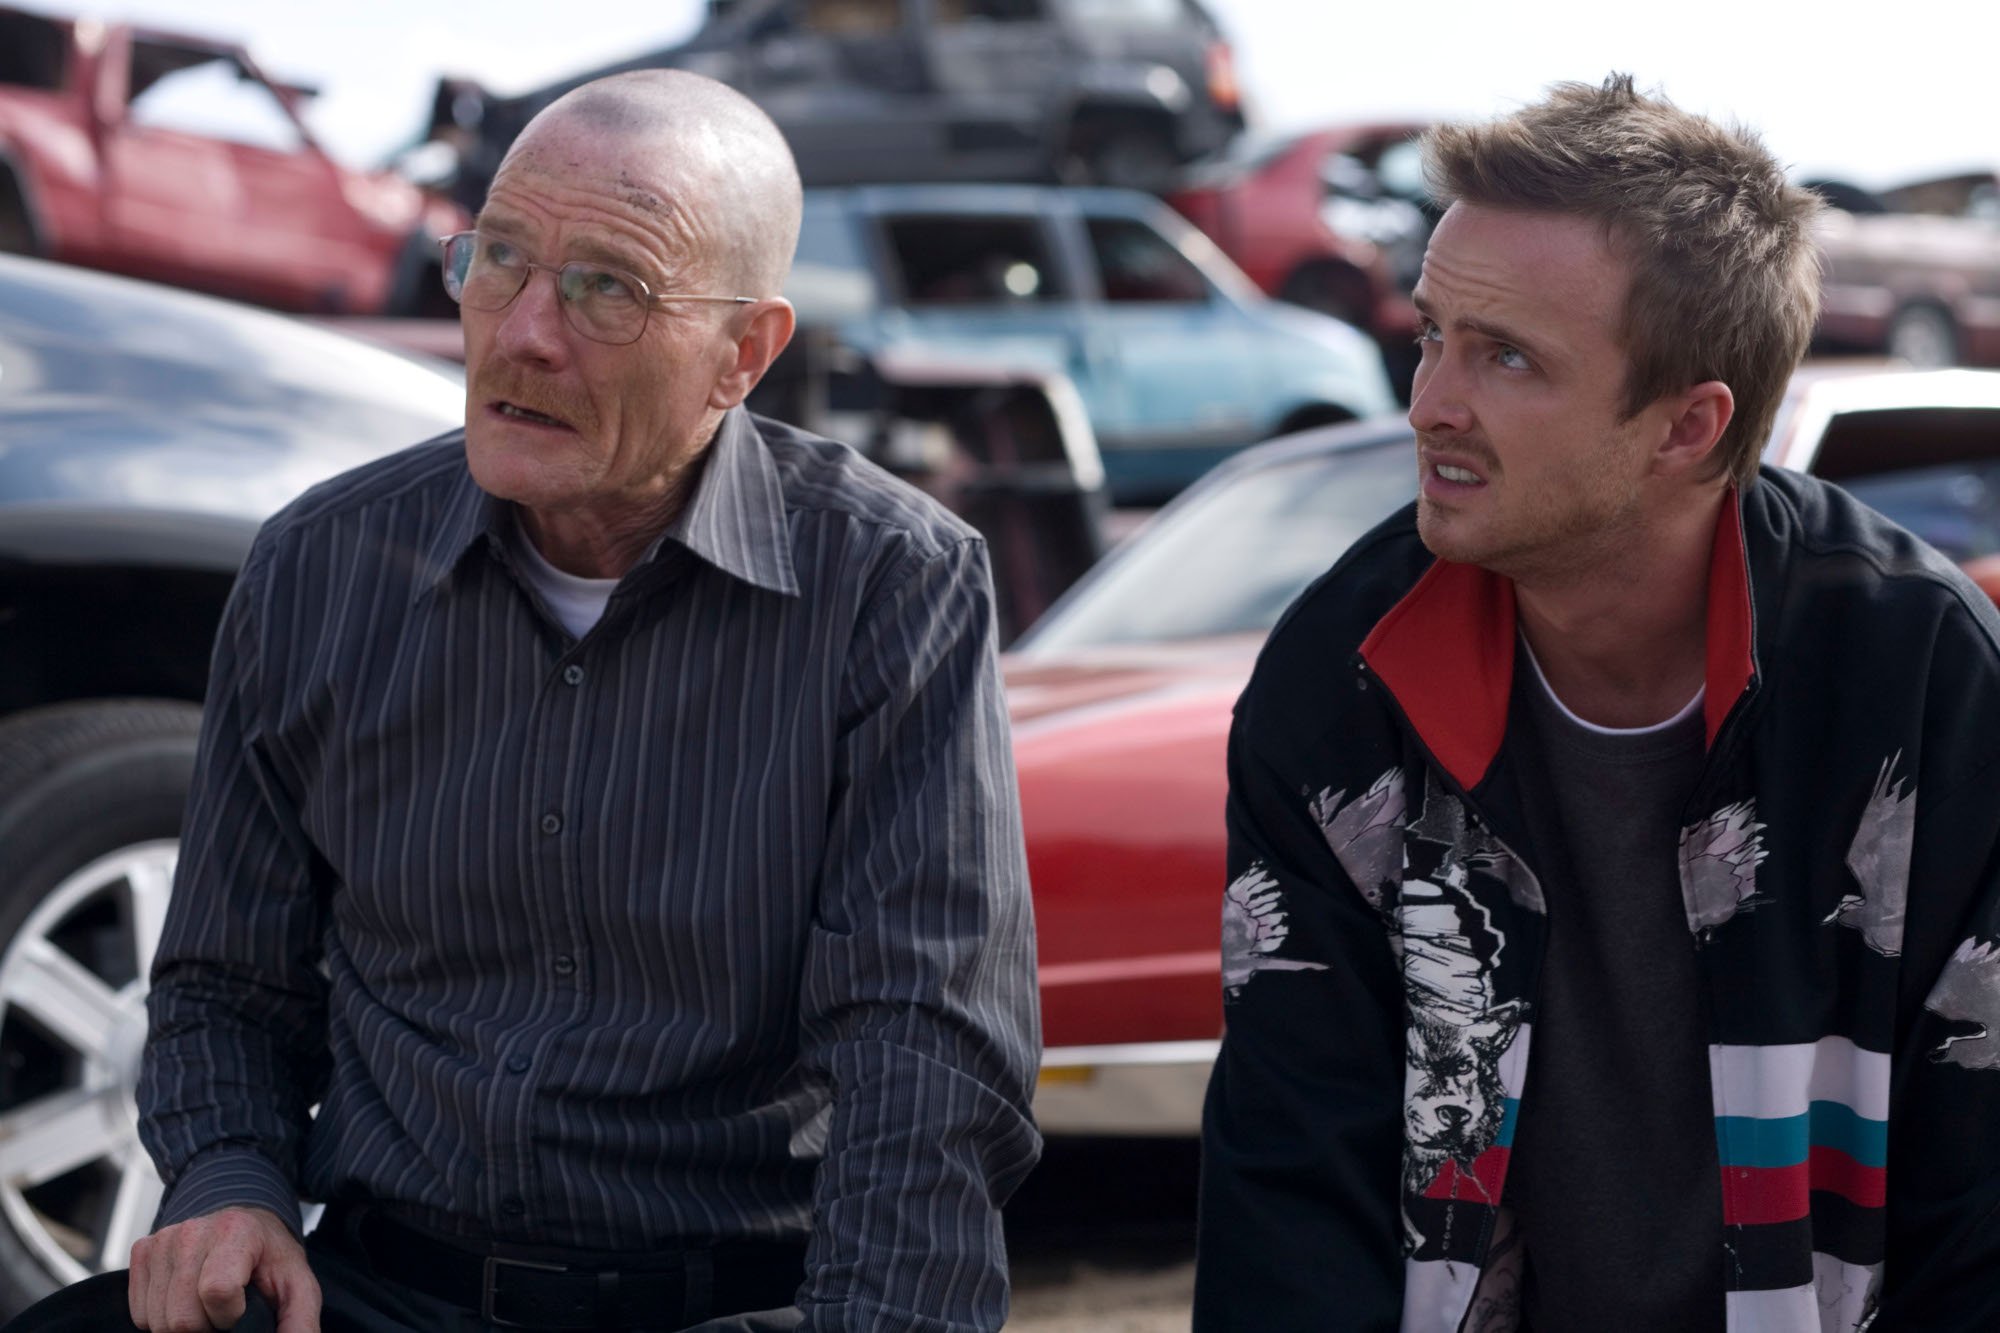 Bryan Cranston and Aaron Paul as Walter White and Jesse Pinkman in 'Breaking Bad' Season 2. They're sitting on the back of a car and both look disappointed.